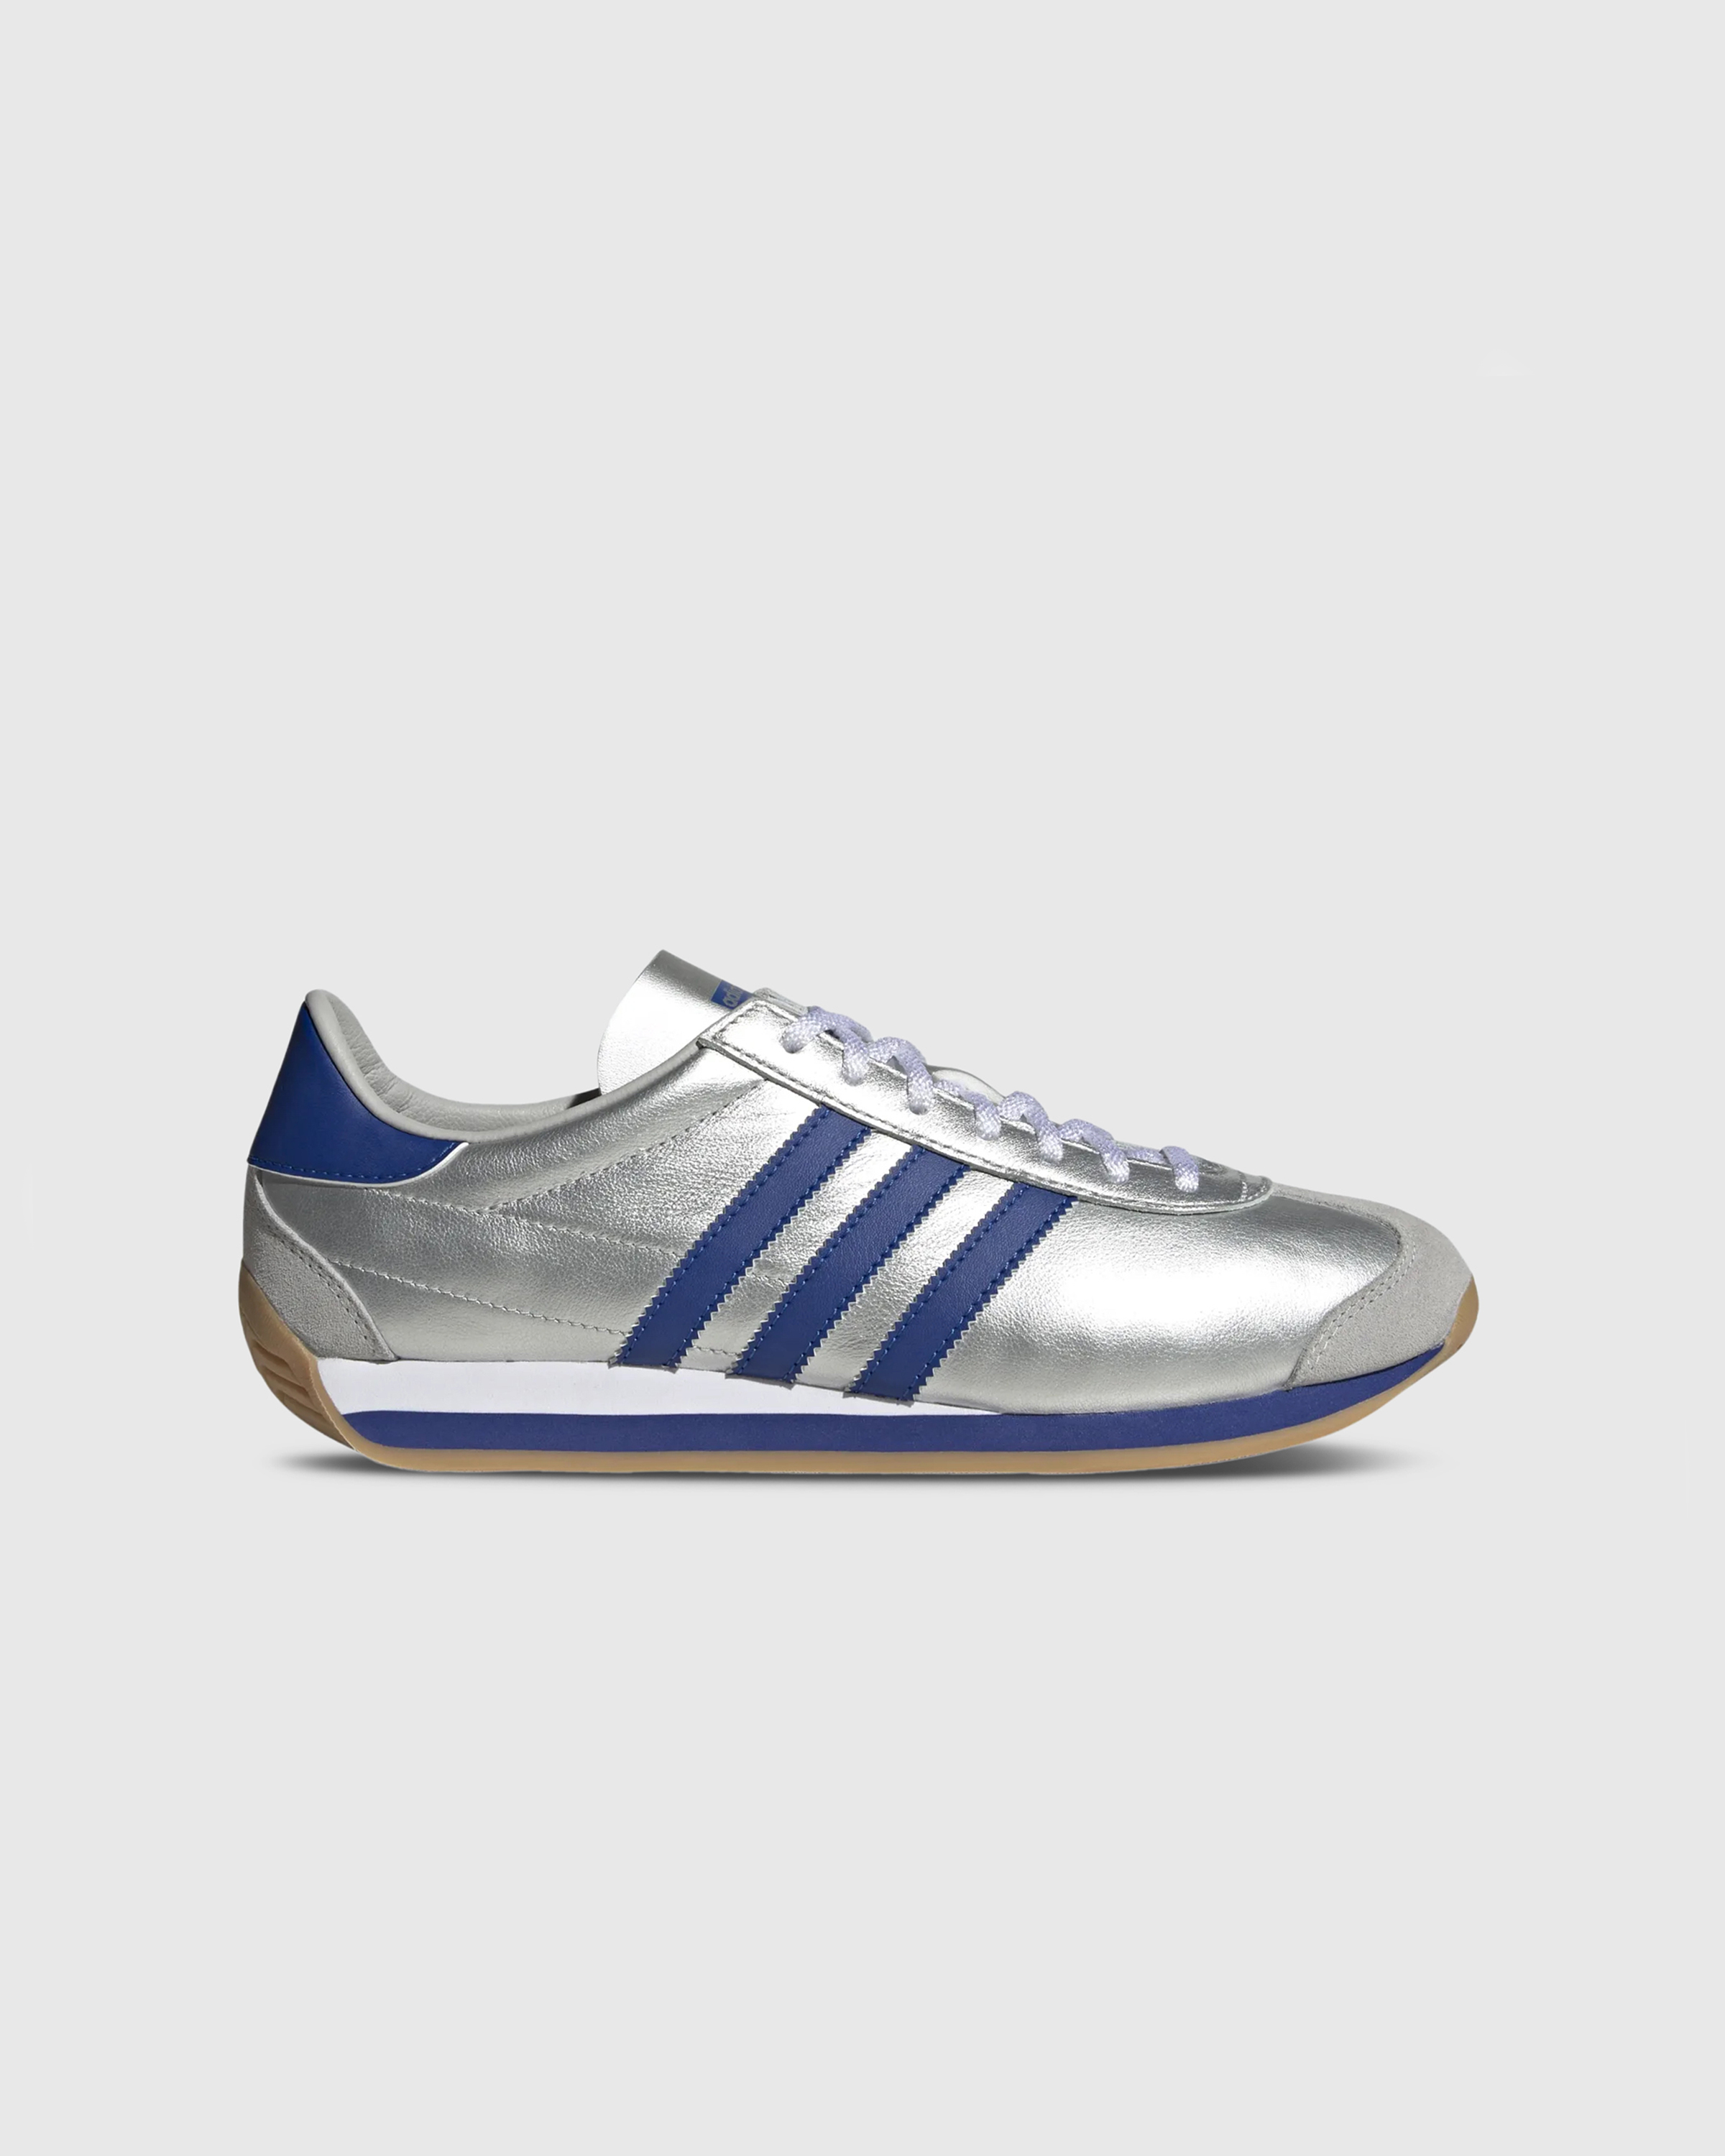 Adidas – Country OG Matte Silver - Sneakers - Silver - Image 1